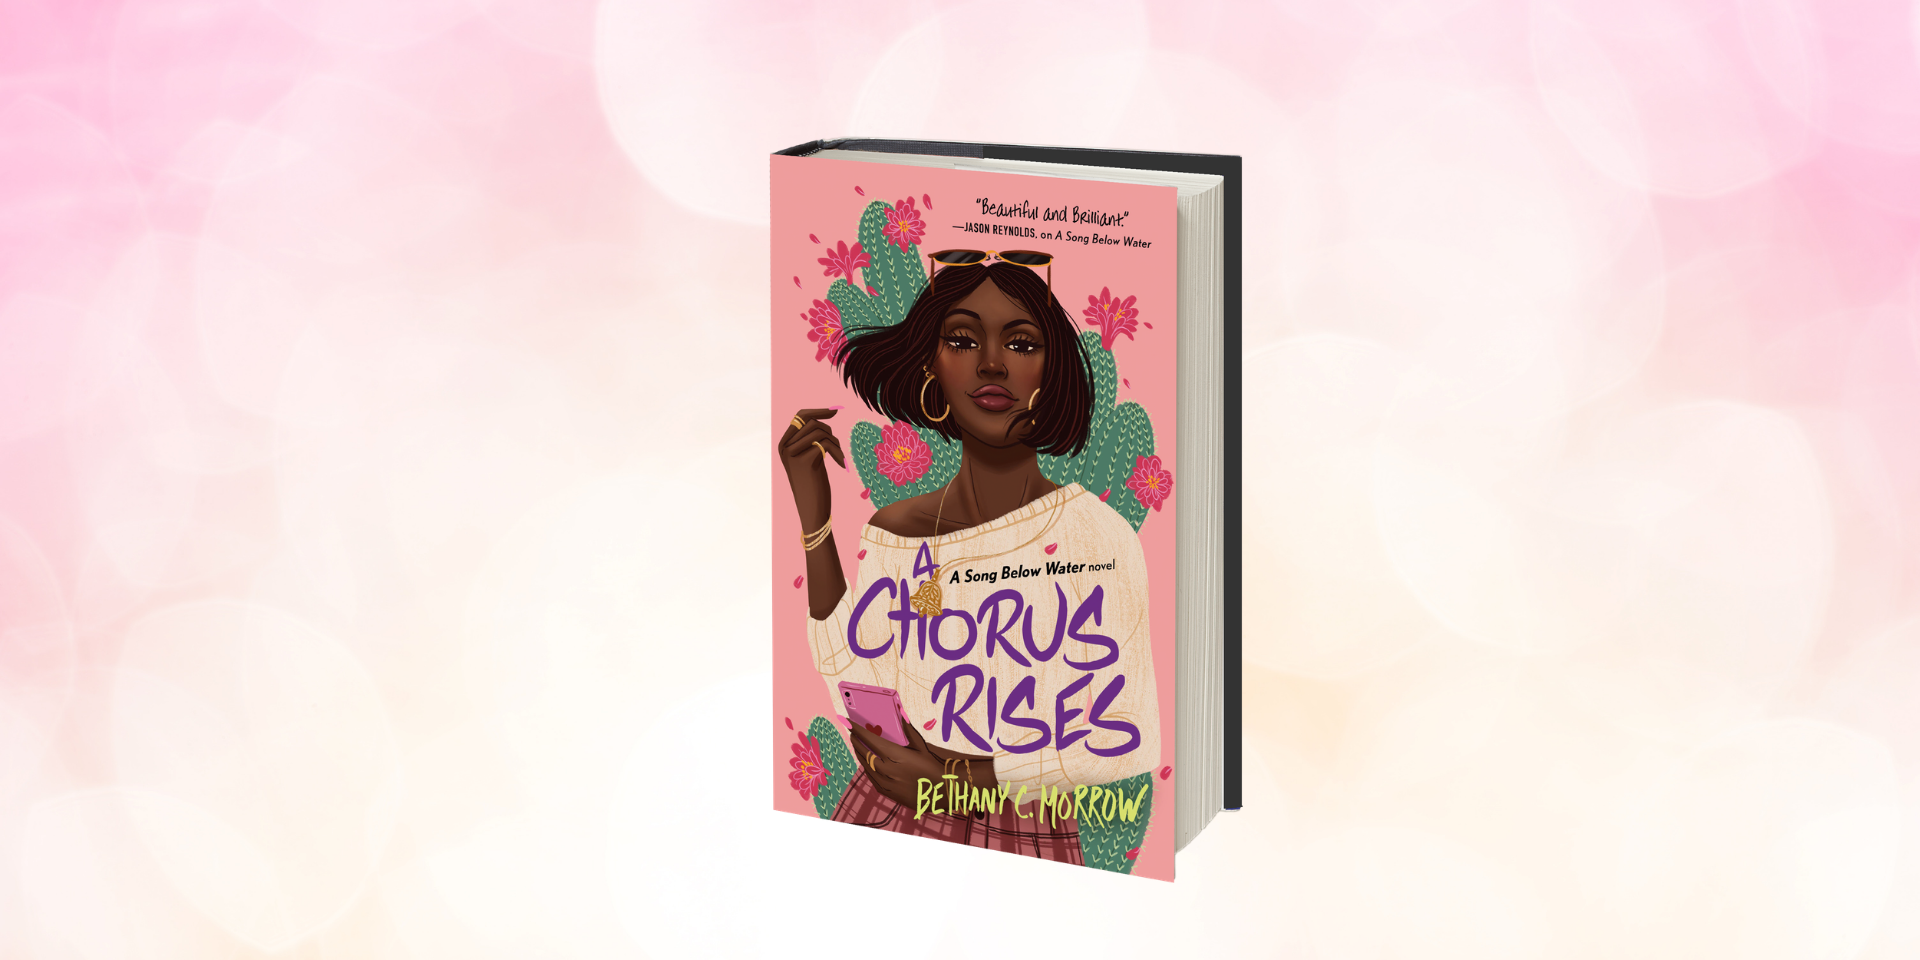 Download a Free Digital Preview of <i>A Chorus Rises</i> by Bethany C. Morrow!